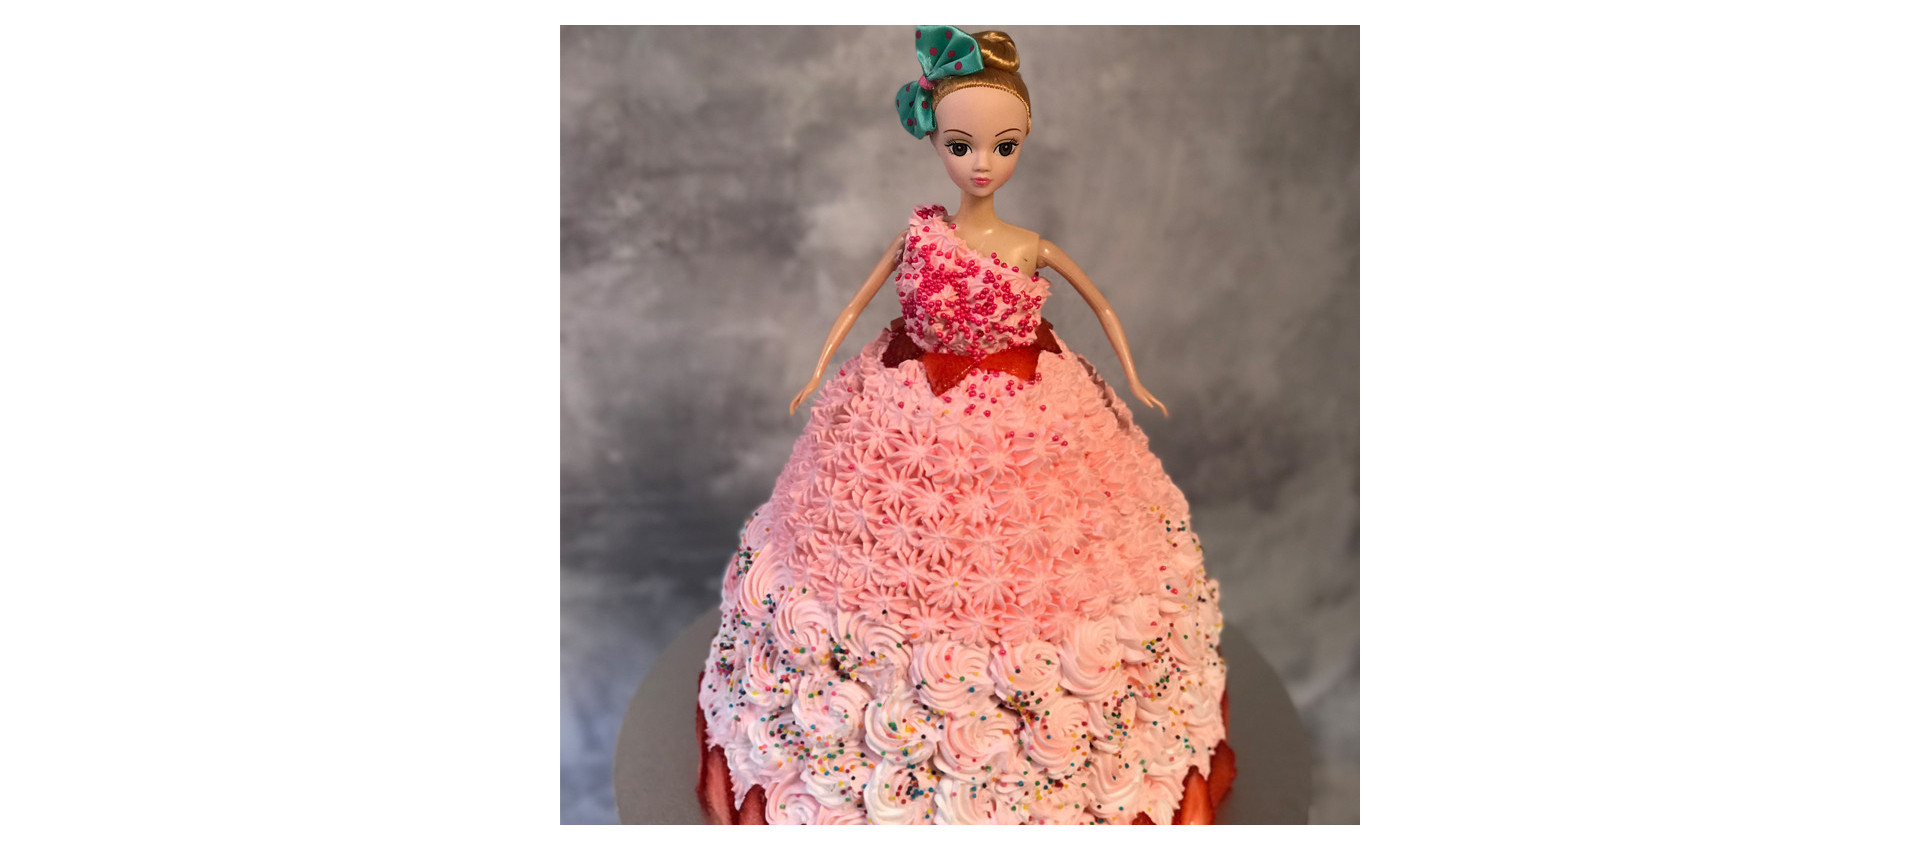 3D Cinderella Doll Cake fit for a Princess - Oh My! Sugar High